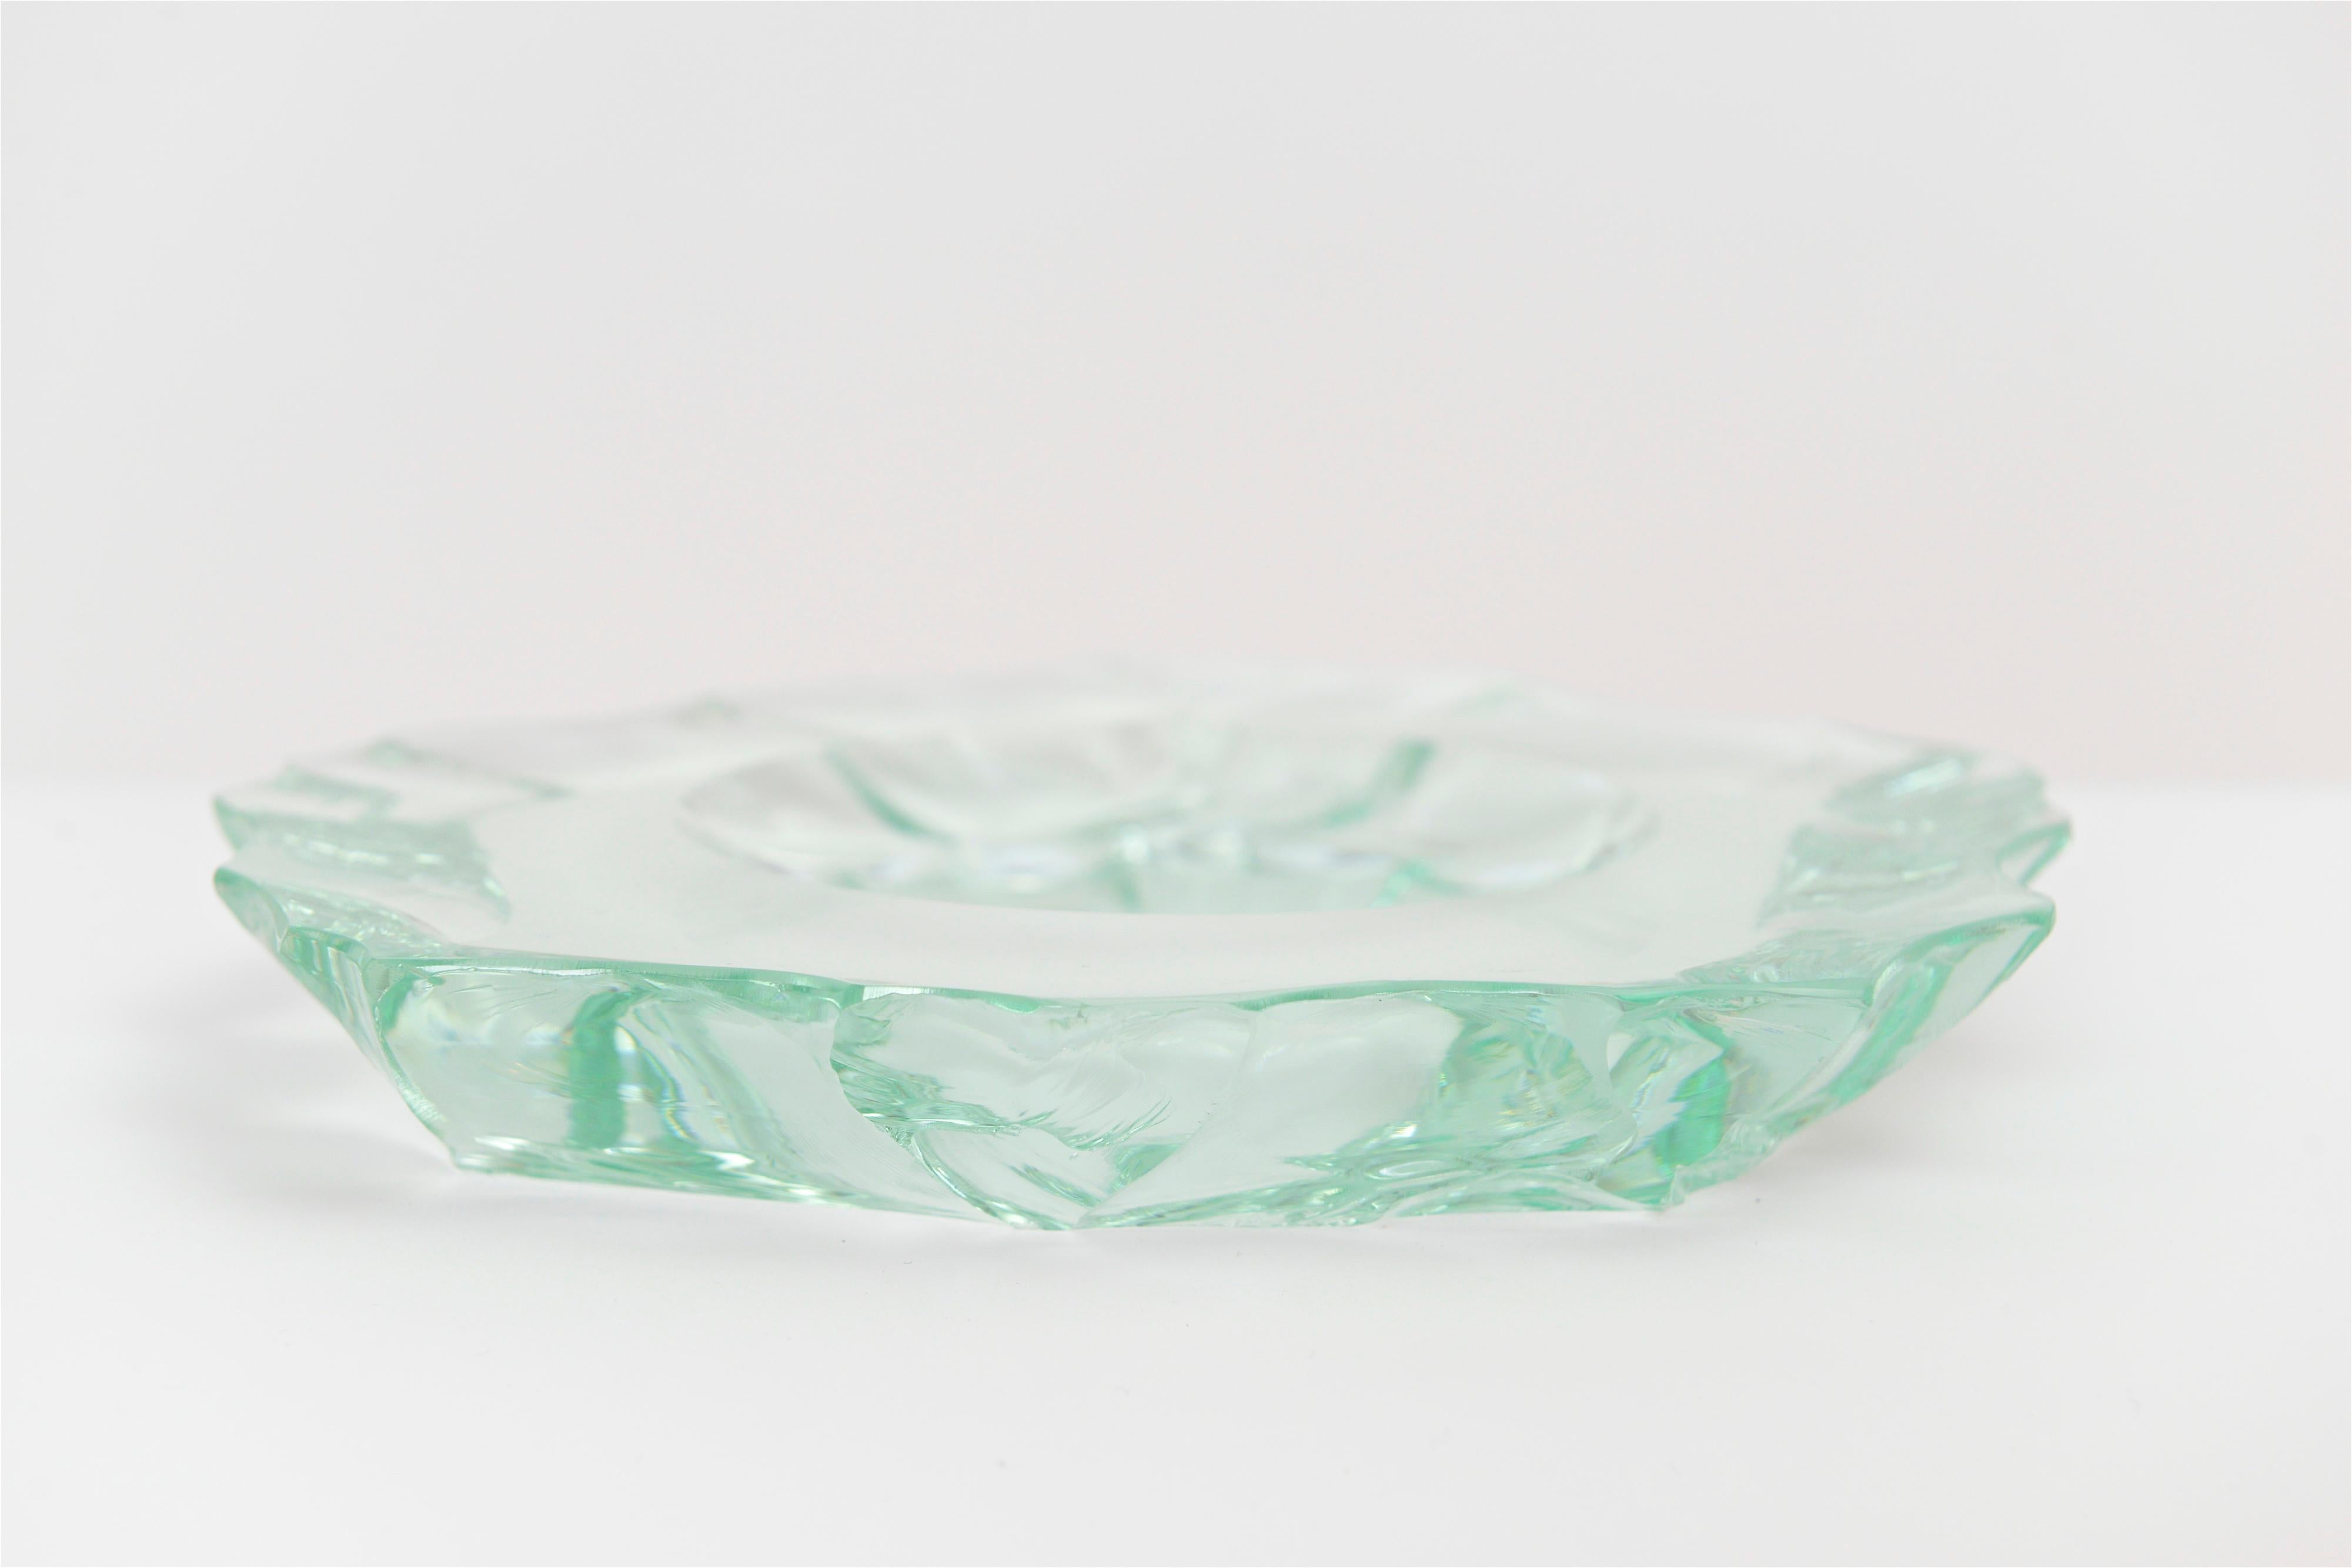 A beautiful ‘scalpellato’ glass dish or vide-poche designed by Pietro Chiesa for Fontana Arte, circa 1940. The color and clarity of the glass, with its ‘chiseled’ outer edges, catch and refract the light beautifully. A truly chic object from 1940s